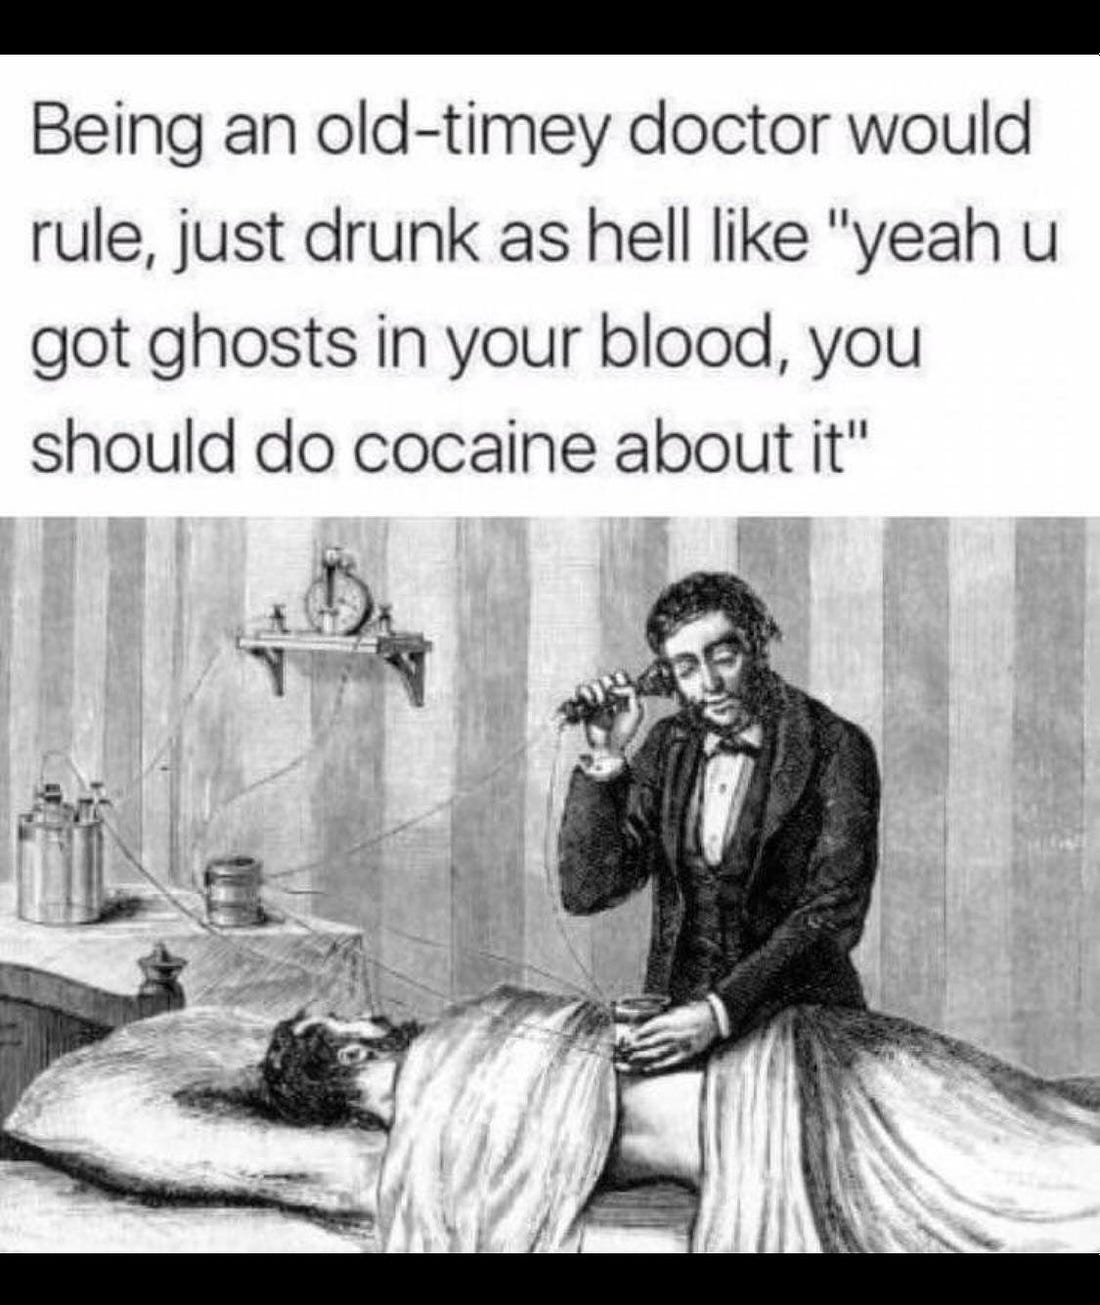 Doctors back in the day: funny